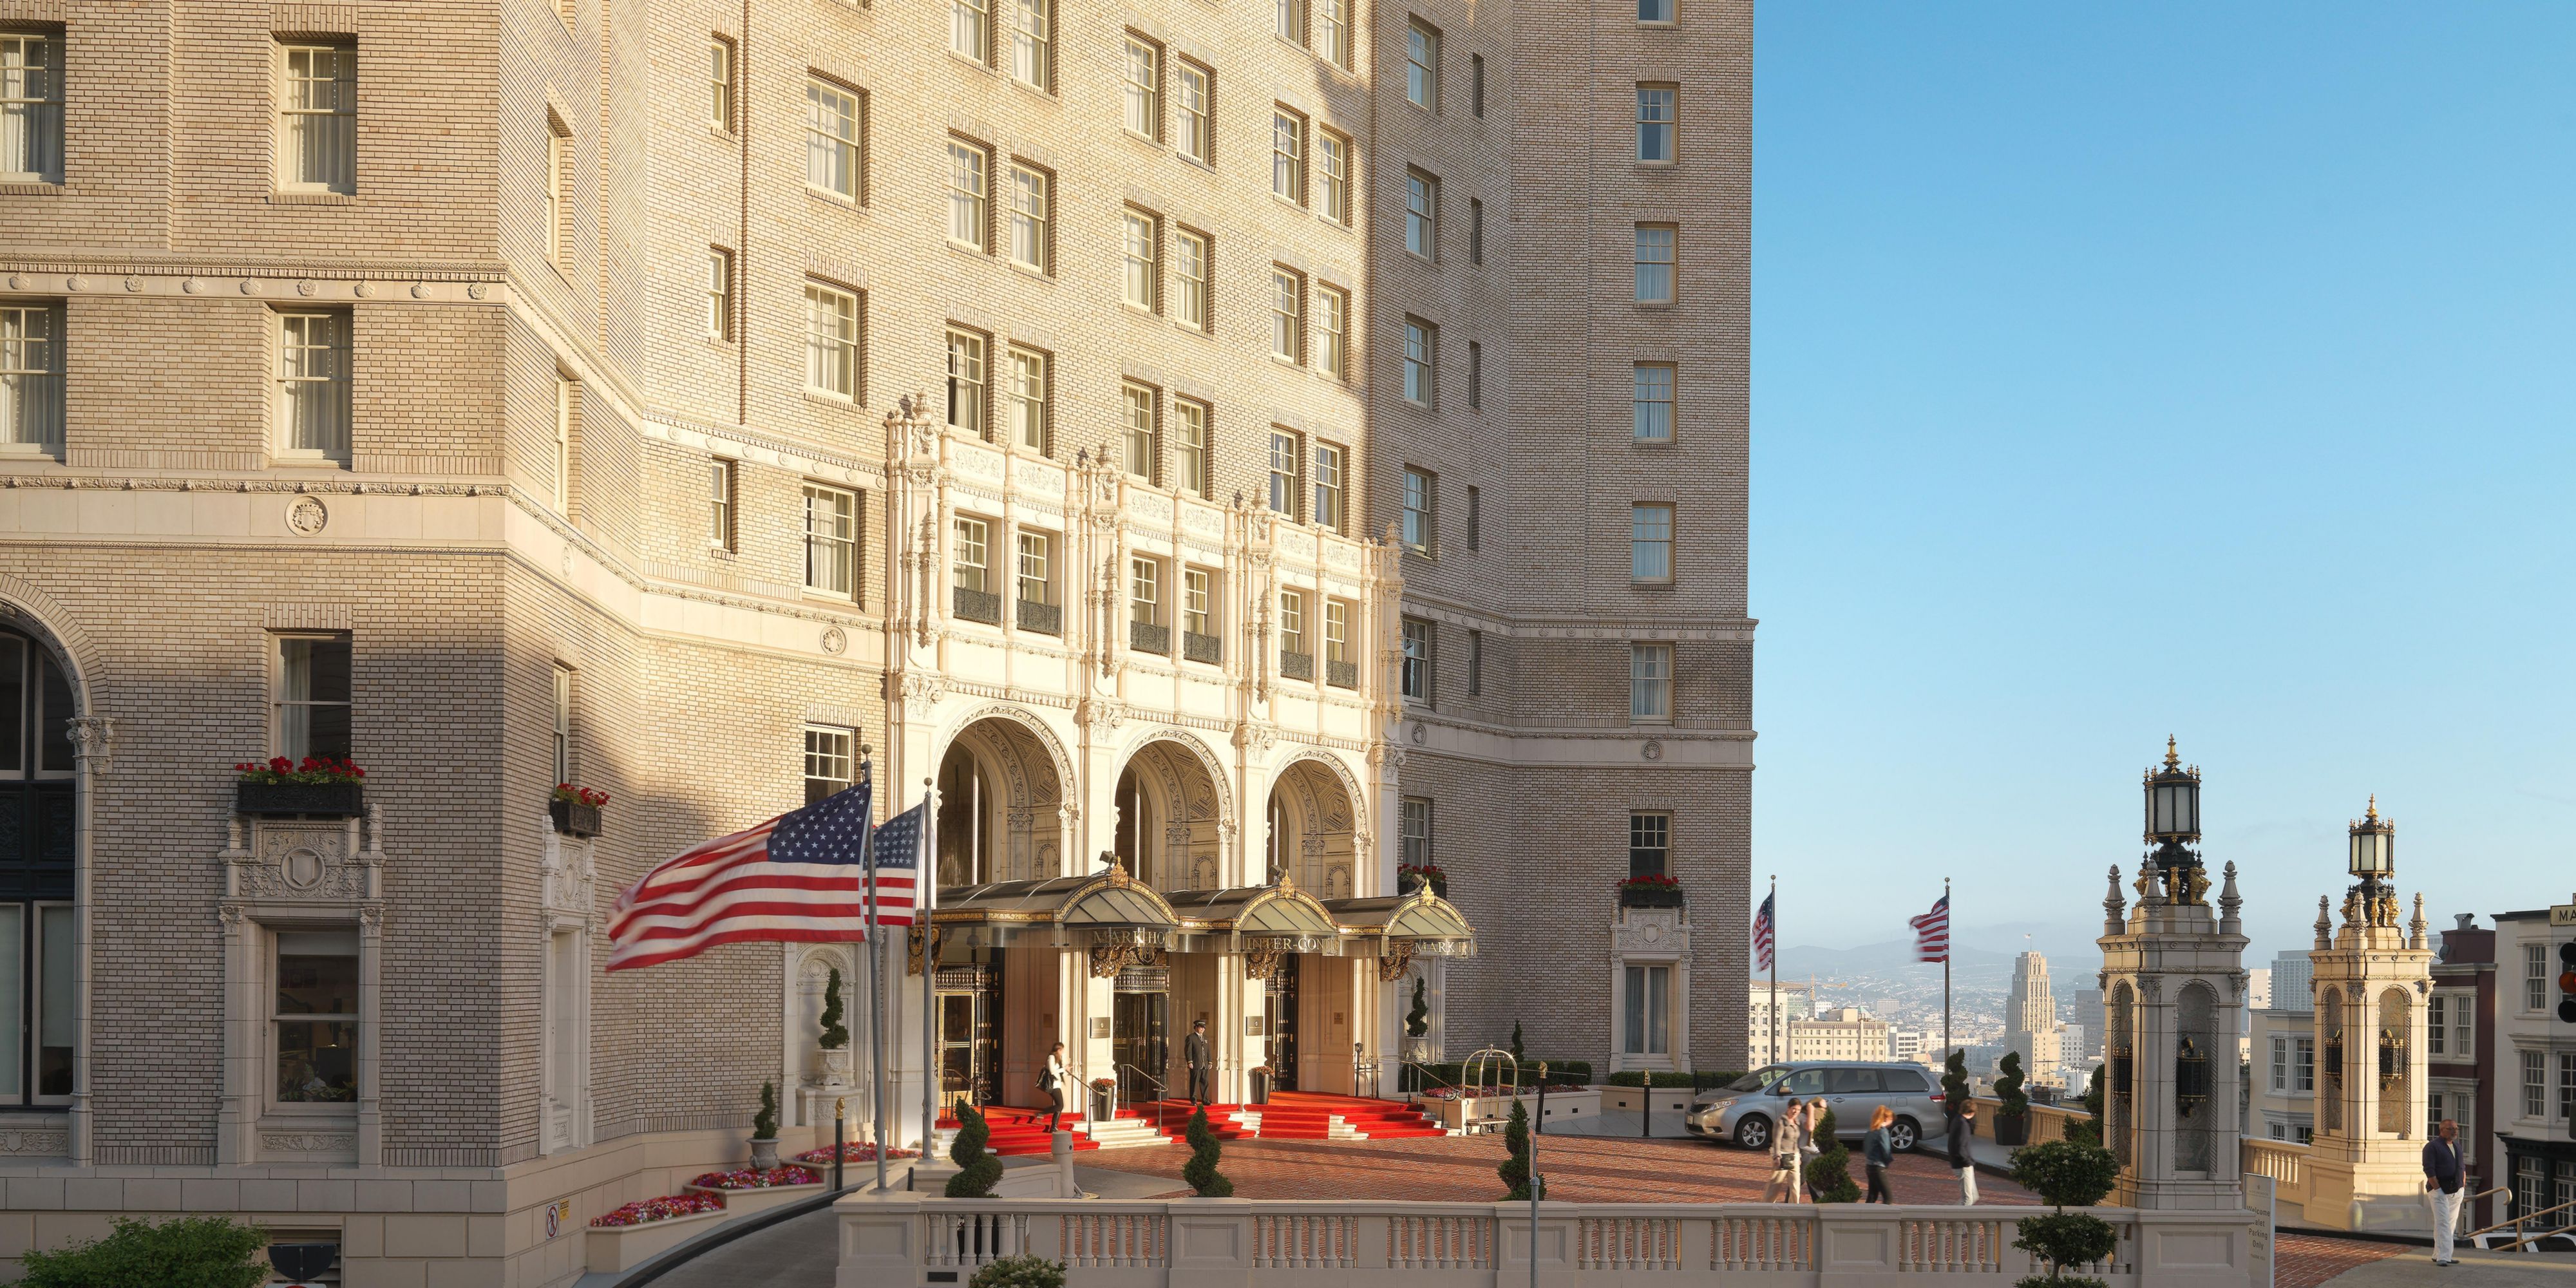 Our renowned hotel has a long-established legacy for service excellence, thanks to our caring and experienced team. Curate your itinerary to explore San Francisco with help from our knowledgeable concierge. Our goal is to provide guests with genuine hospitality throughout the entirety of their unforgettable stay in the City by the Bay.
